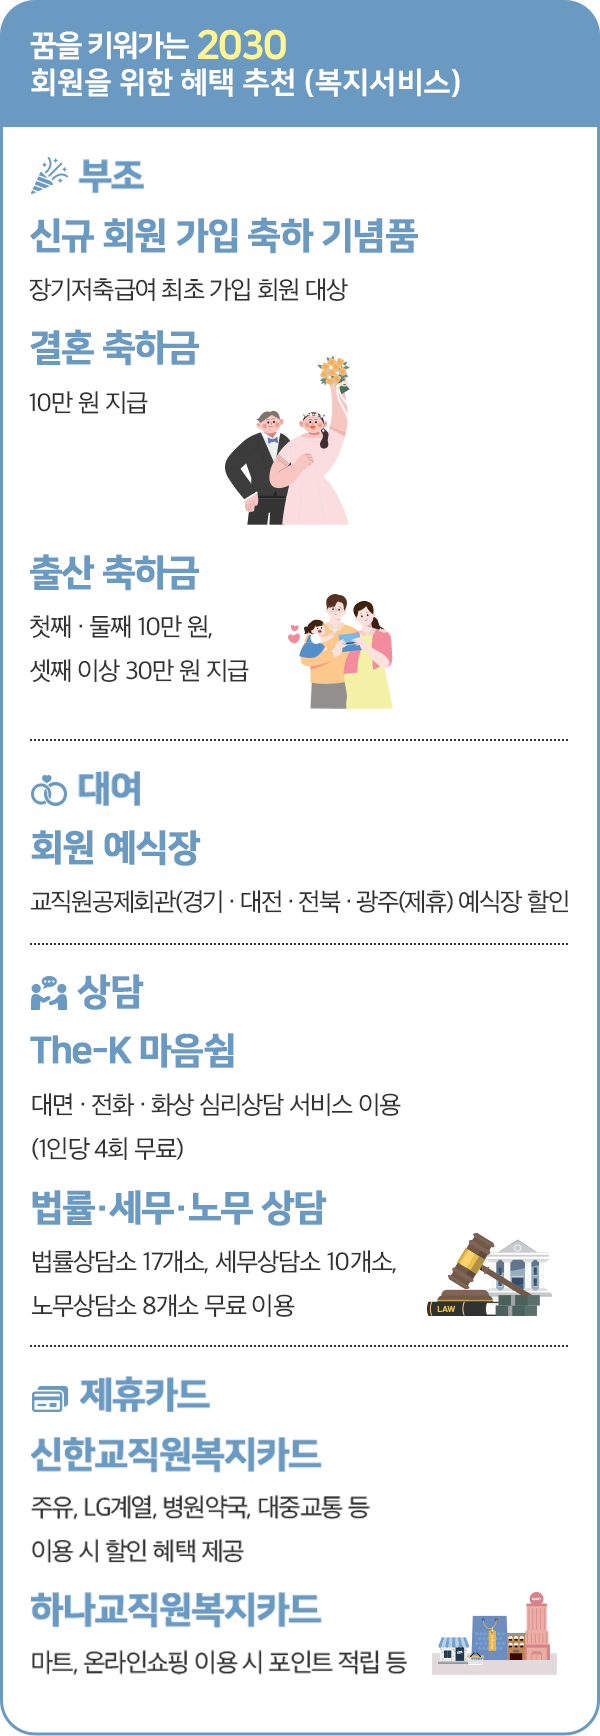 The-K 포커스 2_03